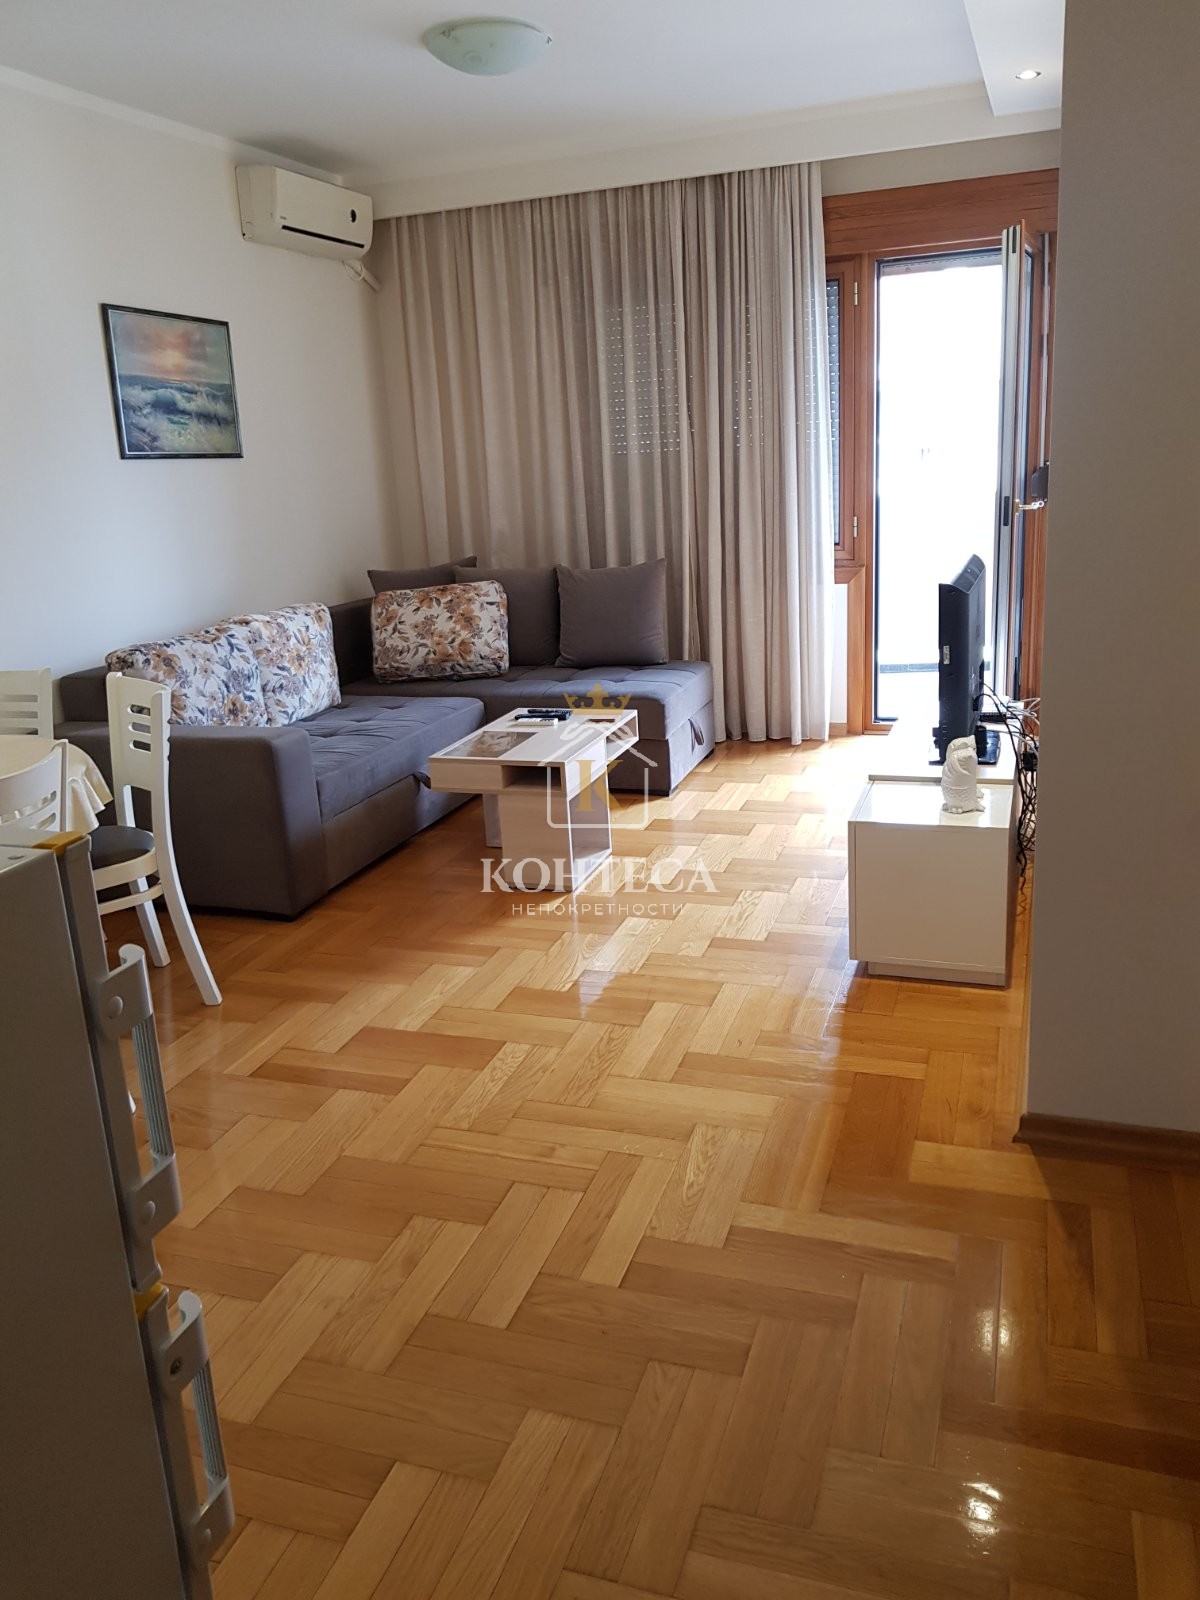 Center of Tivat! One-room apartment with sea view!